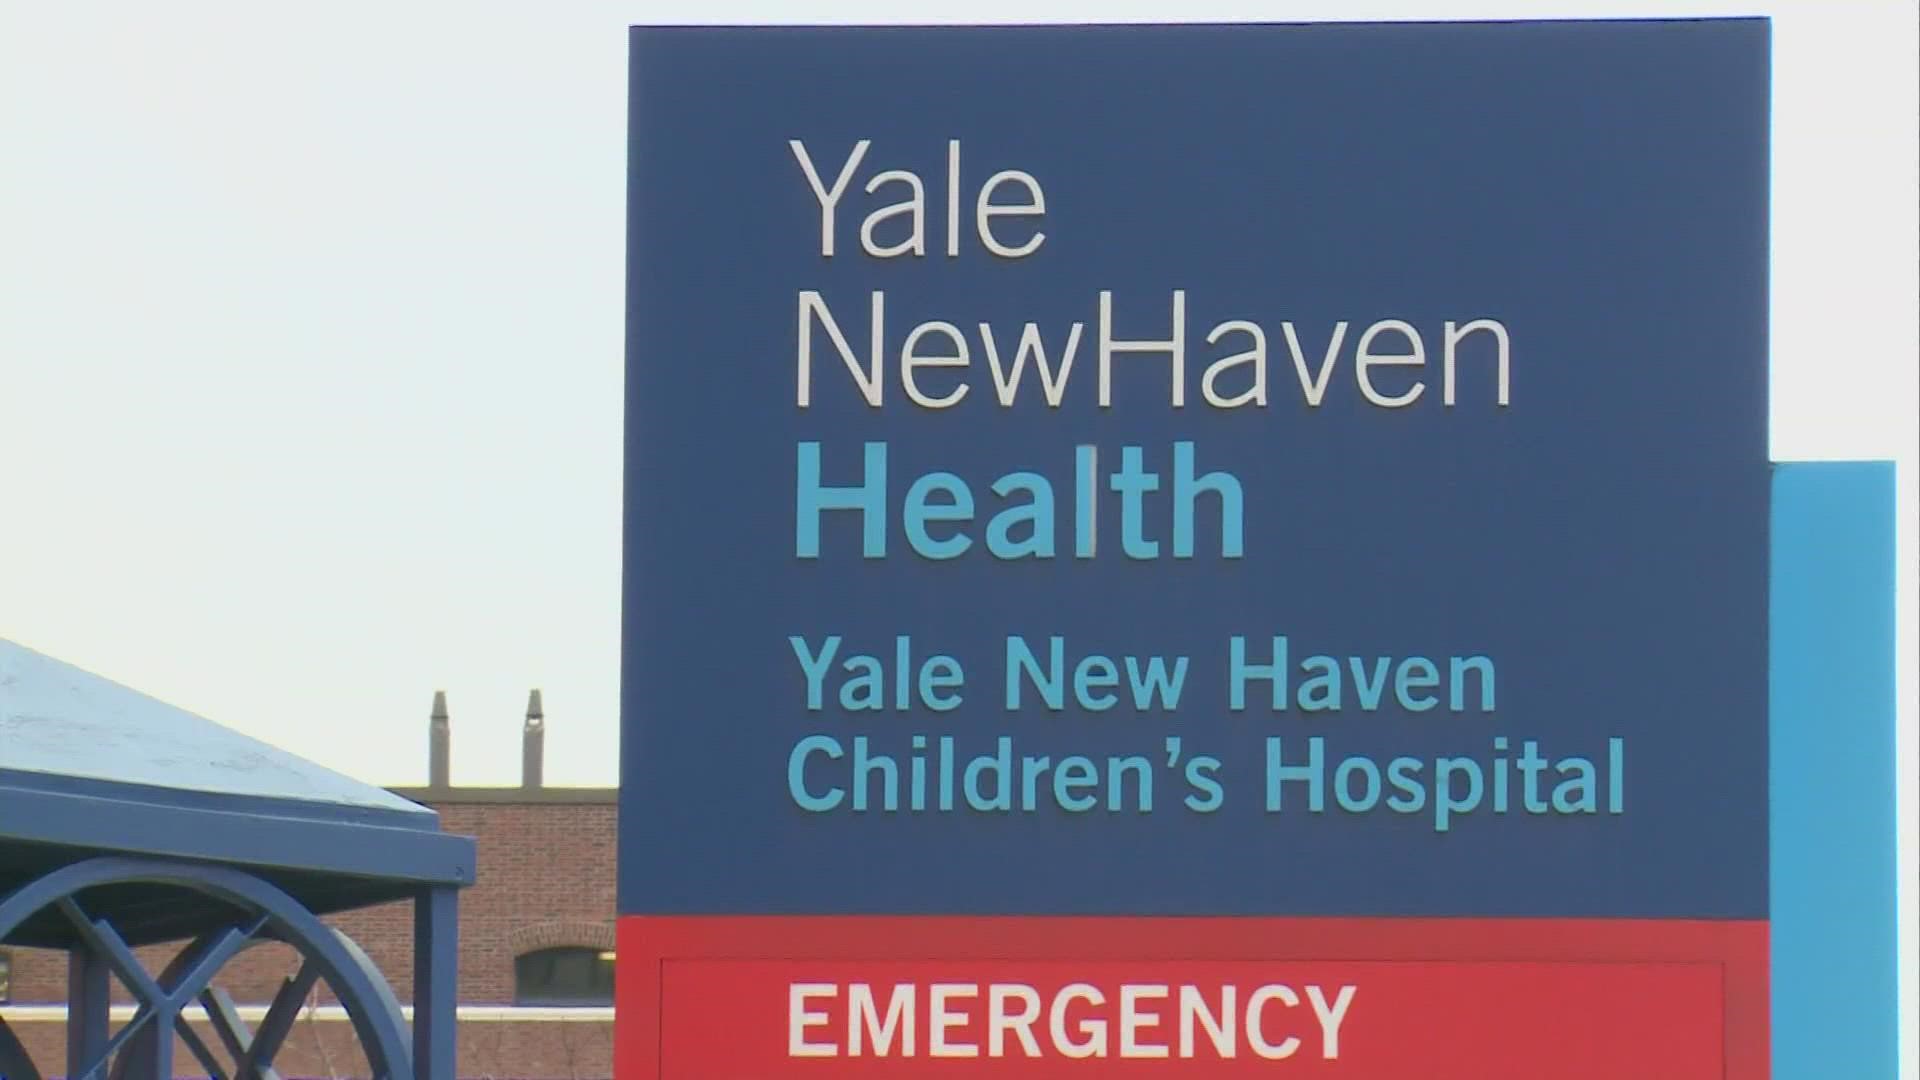 Due to unprecedented patient demand and volume at Yale New Haven Hospital, the leadership said it needs to expand care capabilities quickly.